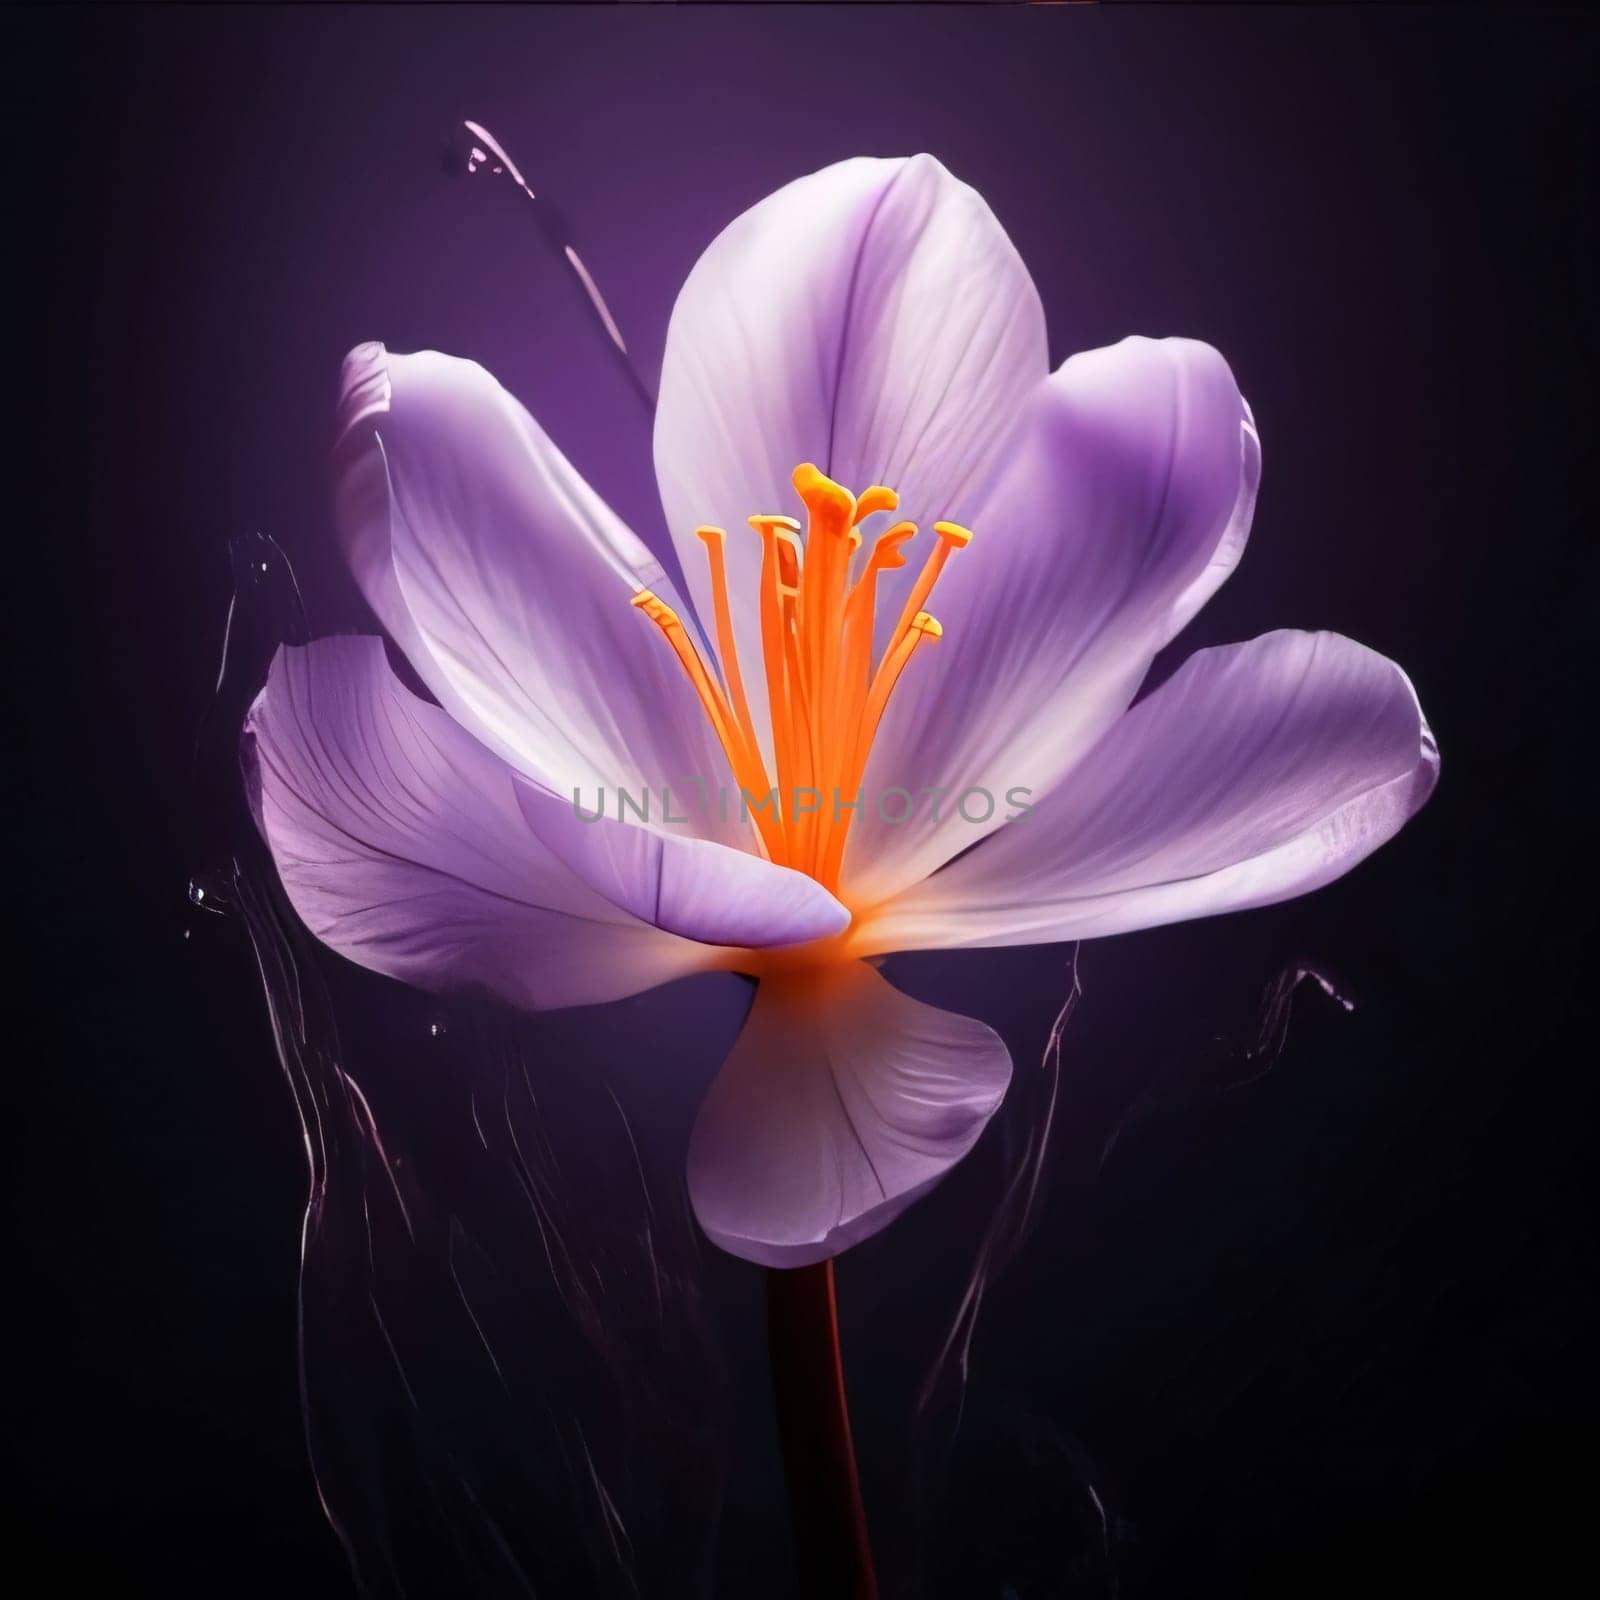 Purple and orange flower with petals up close on a dark background. Flowering flowers, a symbol of spring, new life. A joyful time of nature waking up to life.